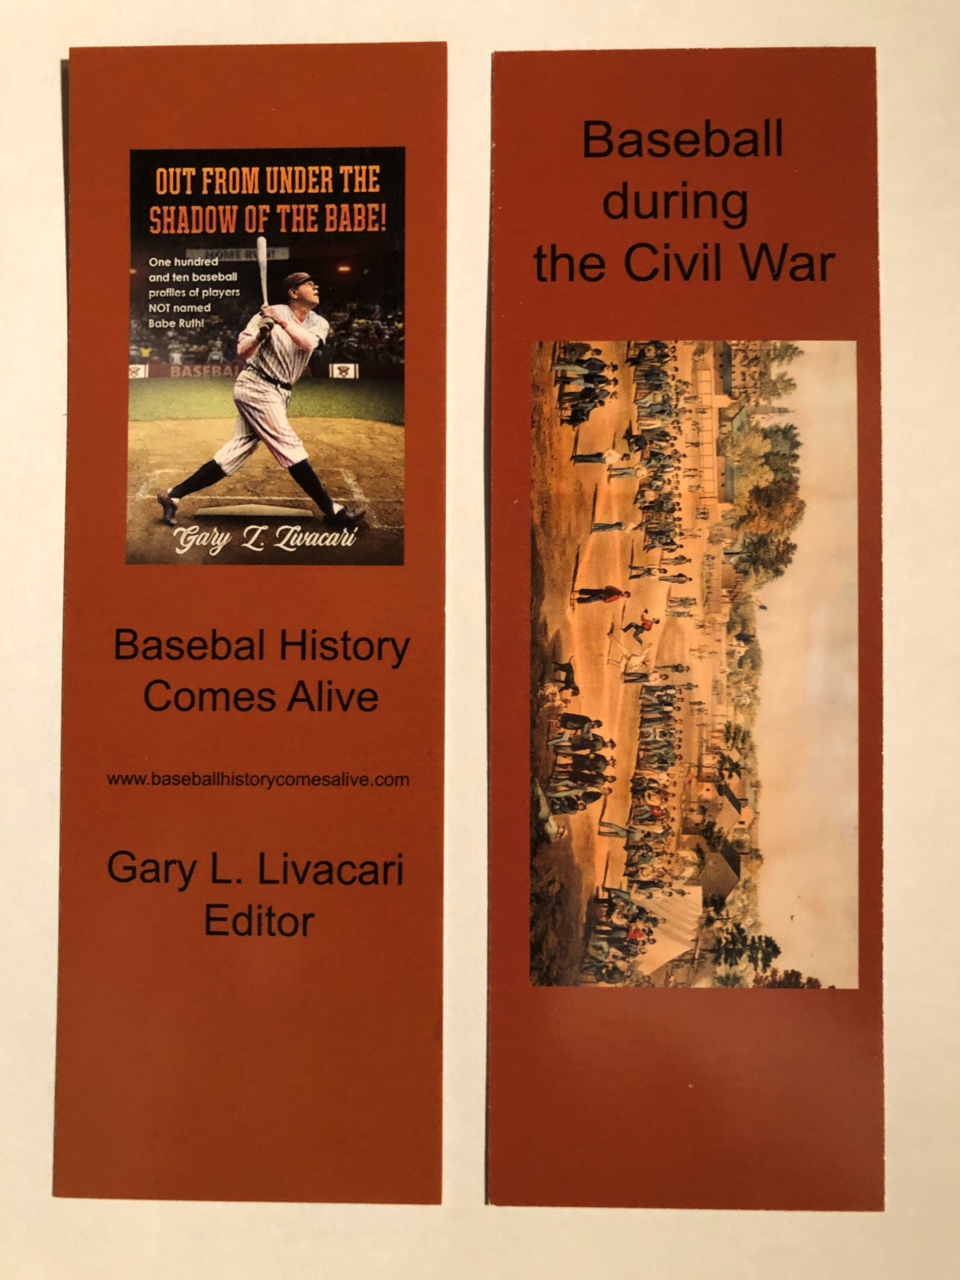 Such A Deal! Free “Baseball History Comes Alive” Bookmarks!